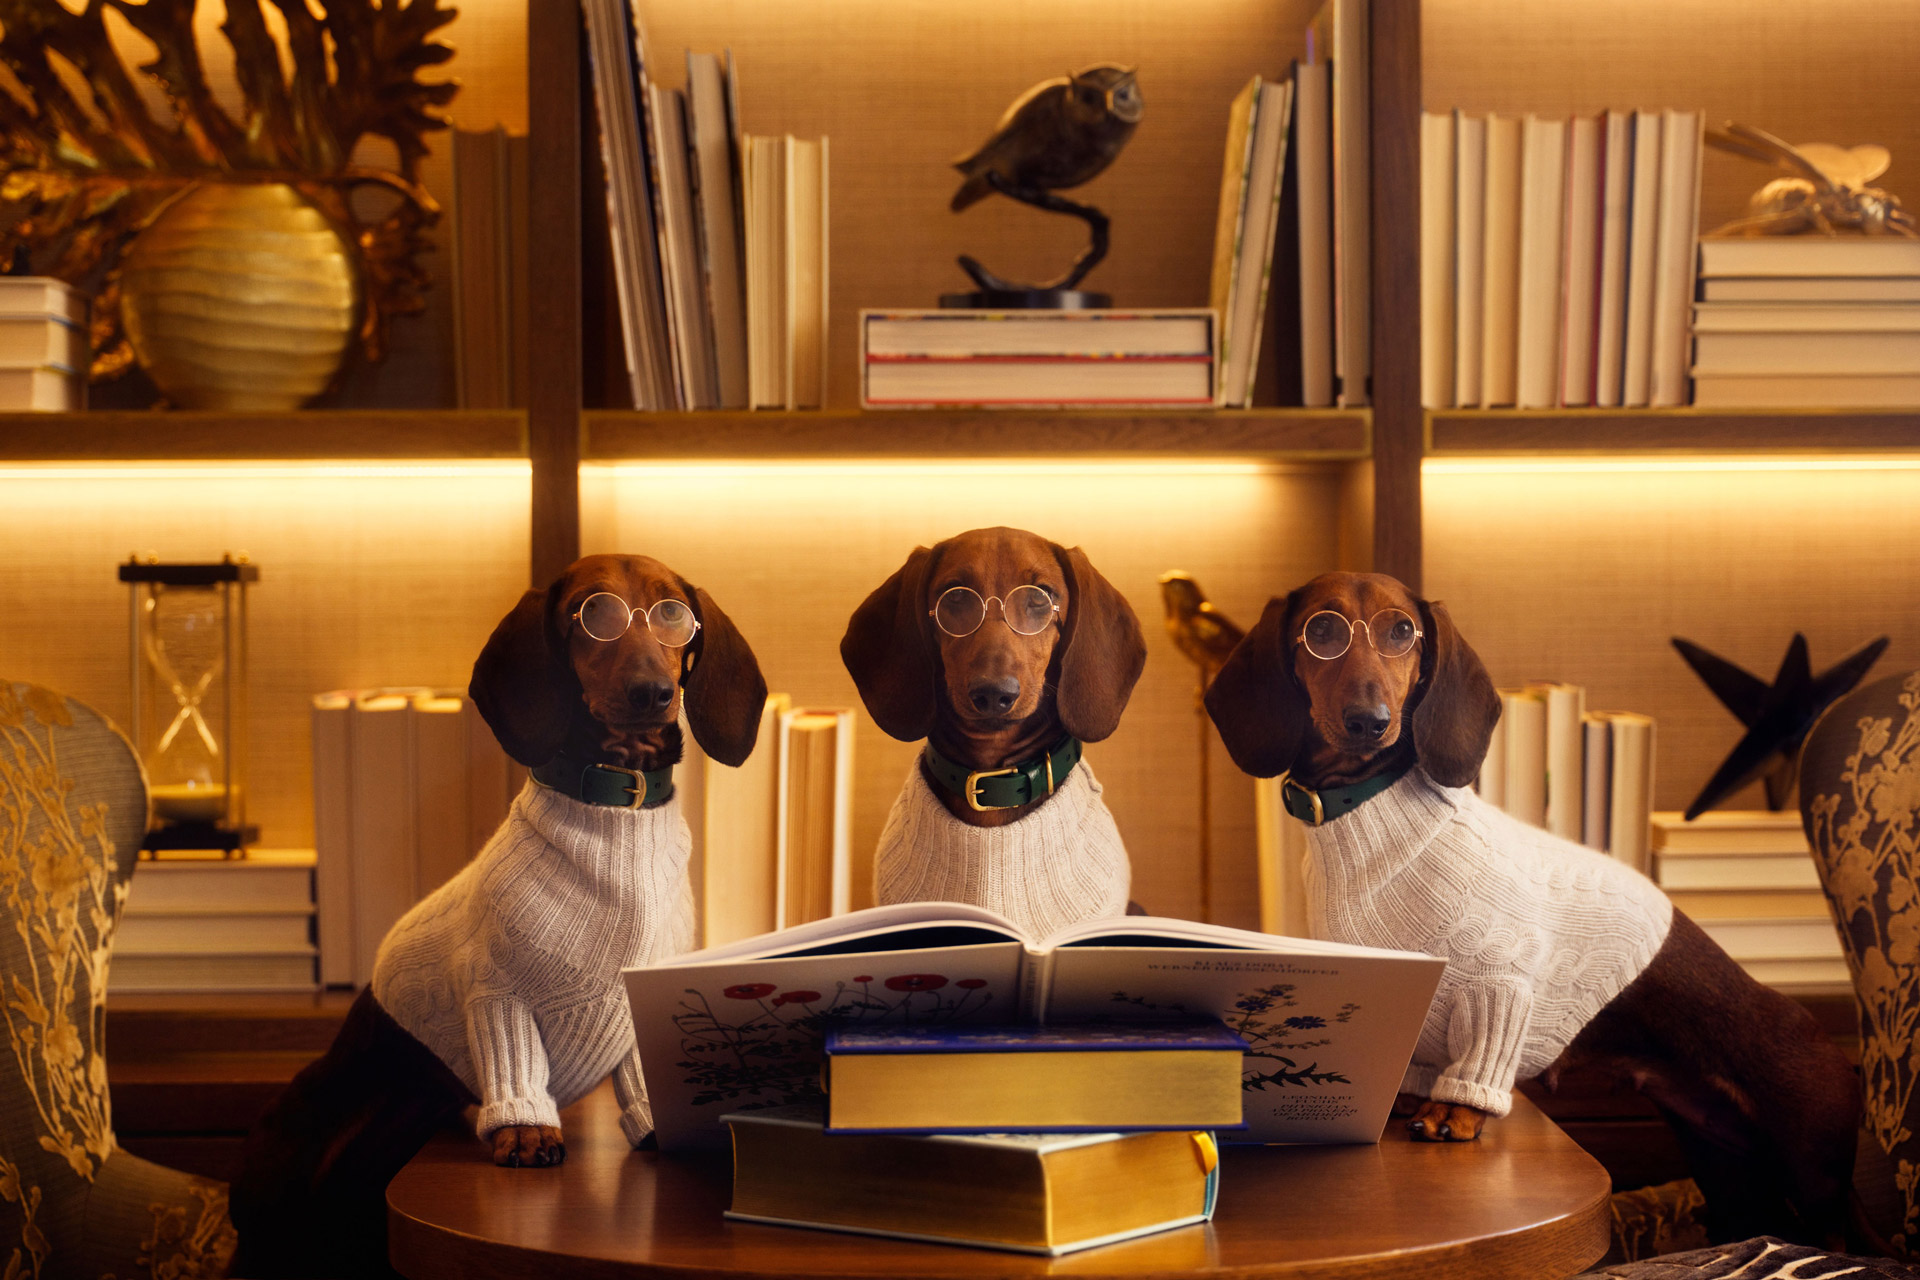 Click here to open the gallery overlay for the image: three dogs with glasses reading a book as part of a gallery decorative page